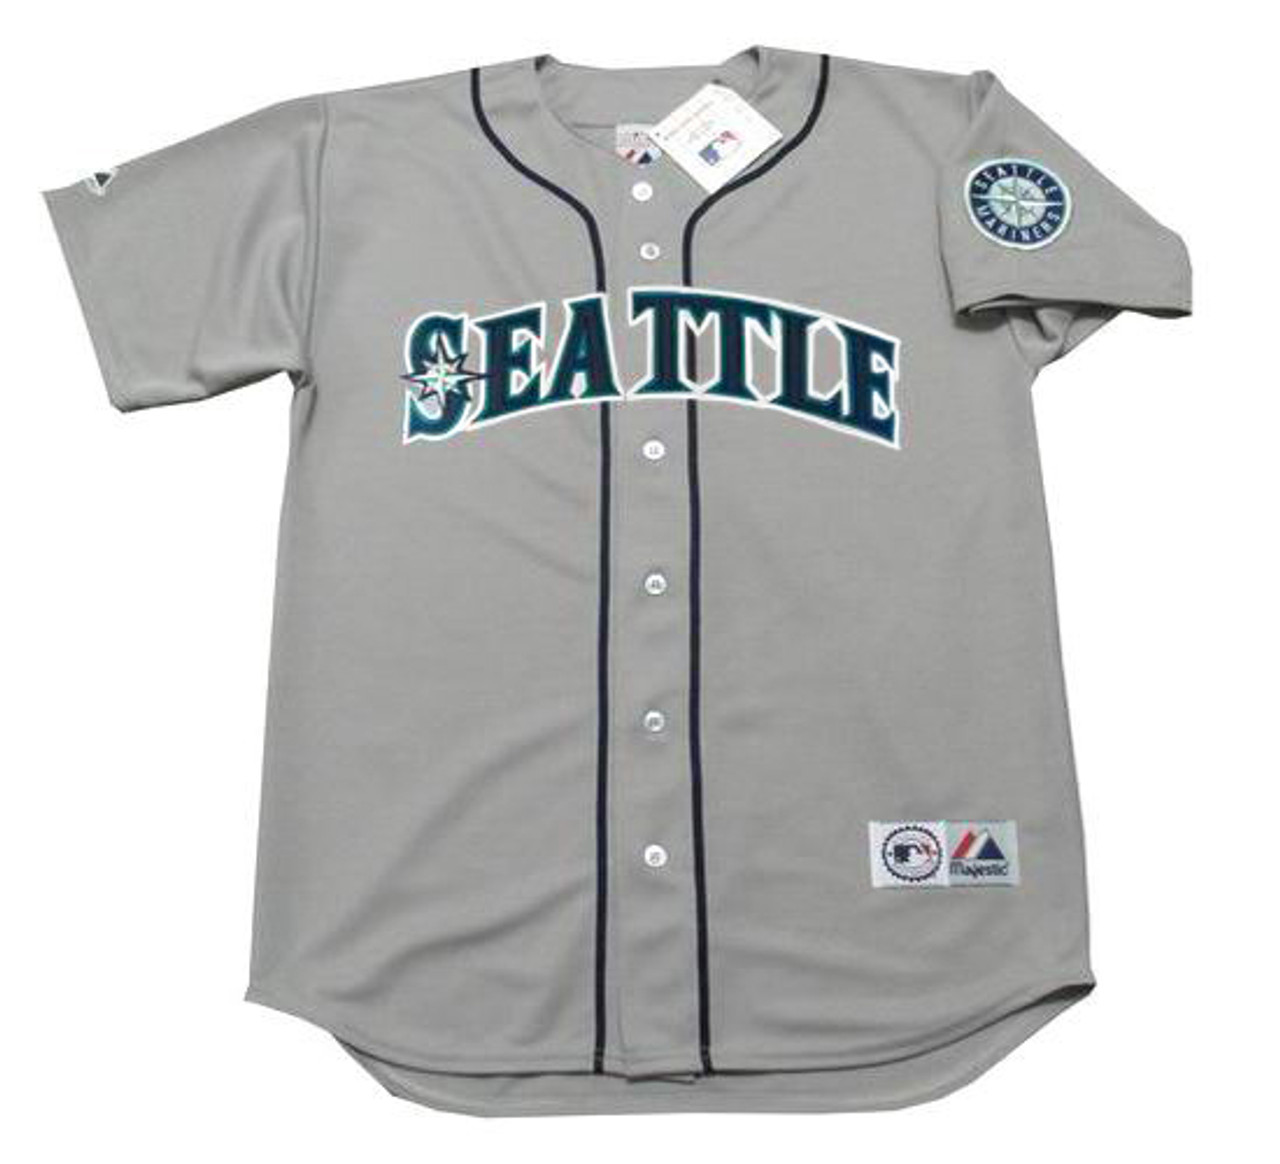 Ken Griffey Jr Seattle Mariners Throwback Jersey NEW With 